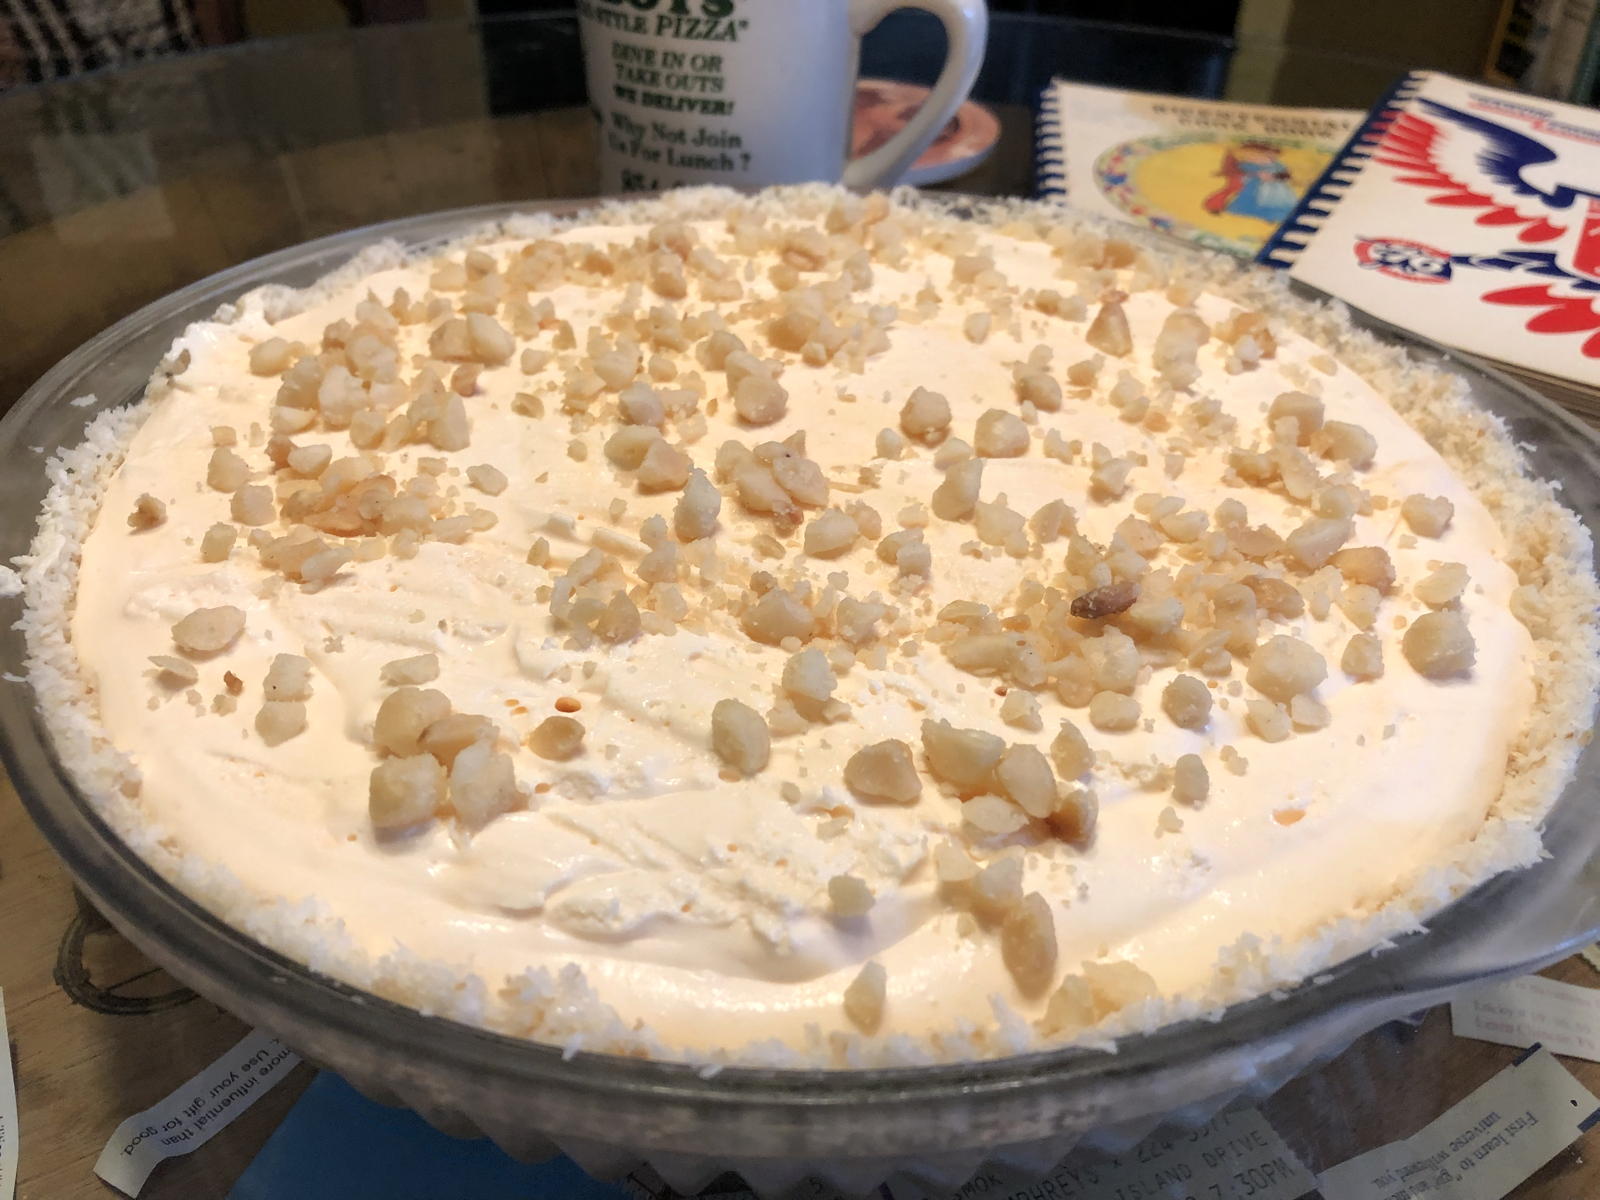 Bicentennial coconut orange pie: Coconut-orange pie, with a crust from the Garvin County Bicentennial Recipe Book, and filling from the Fruitport Bicentennial Cookbook.; cookbooks; pie; oranges; coconut; America’s Bicentennial